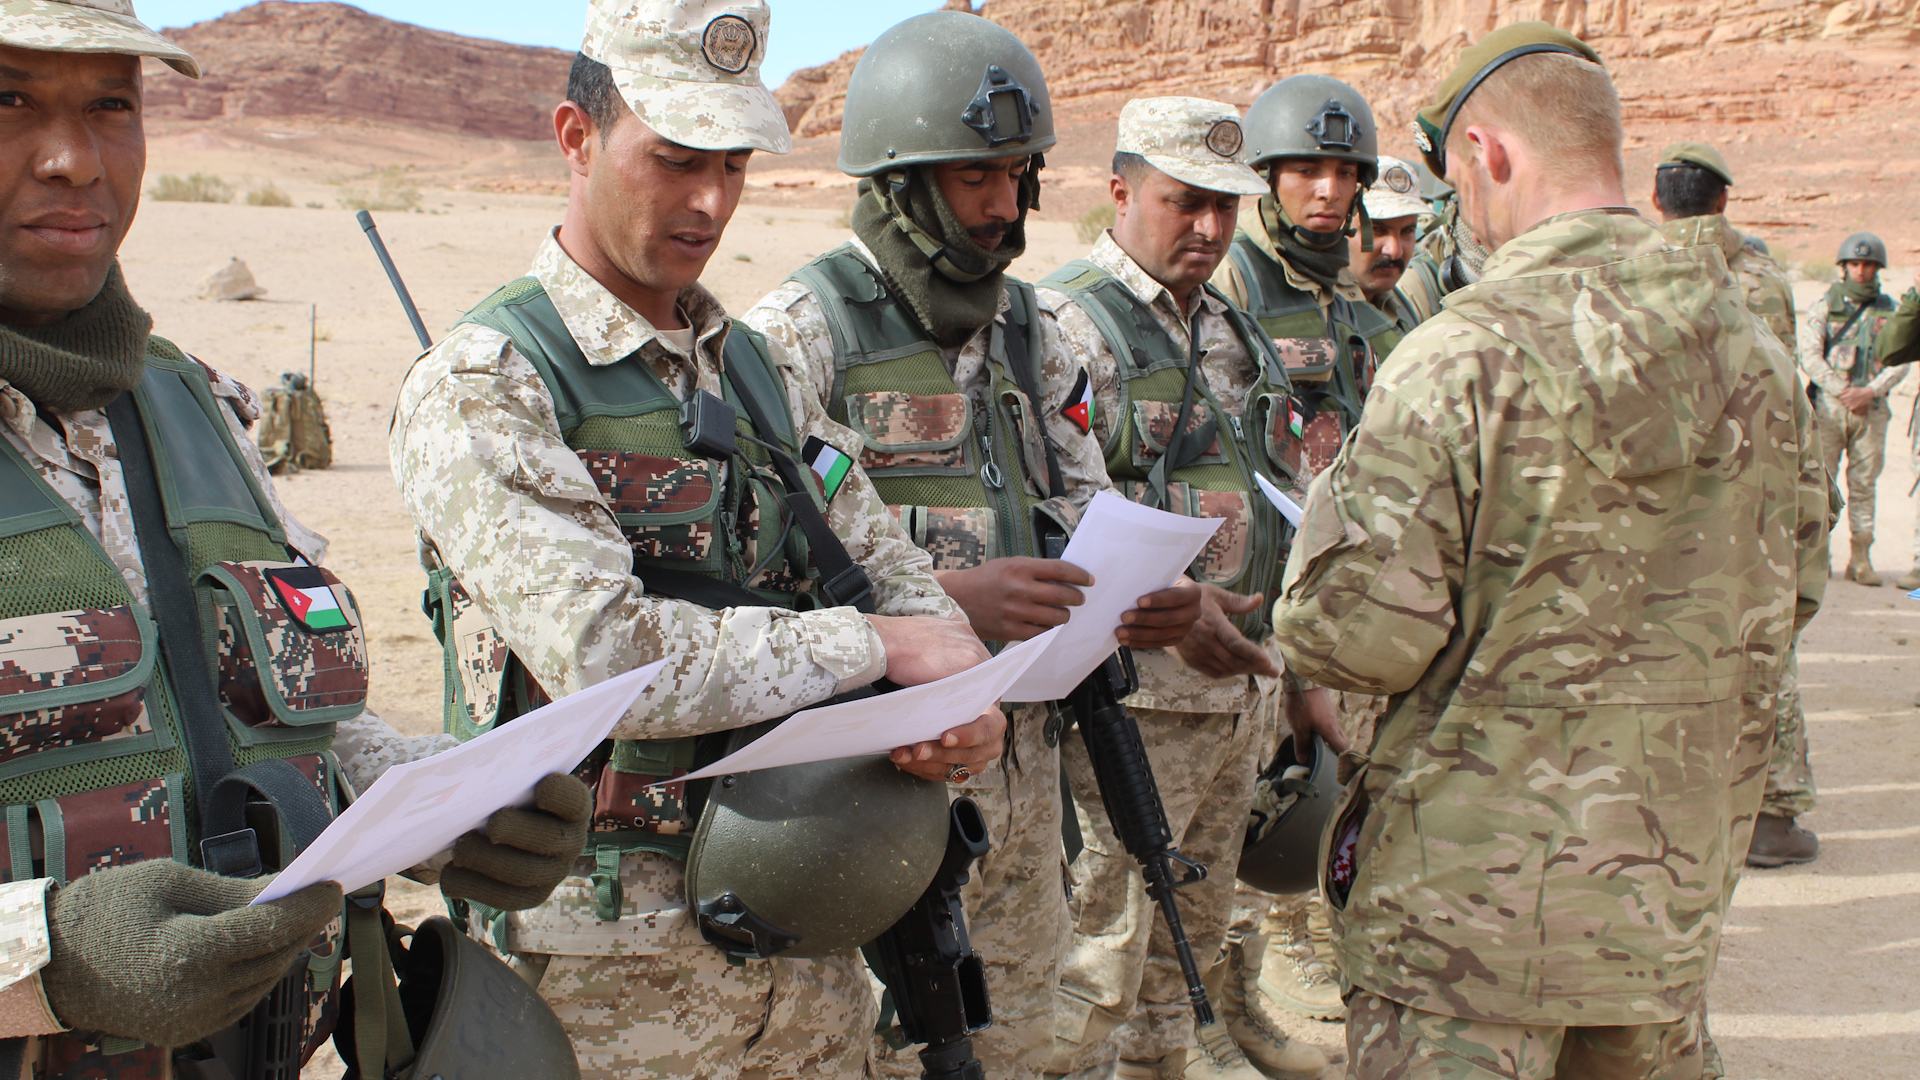 British forces on a previous exercise in Jordan. (British Army/File Photo)